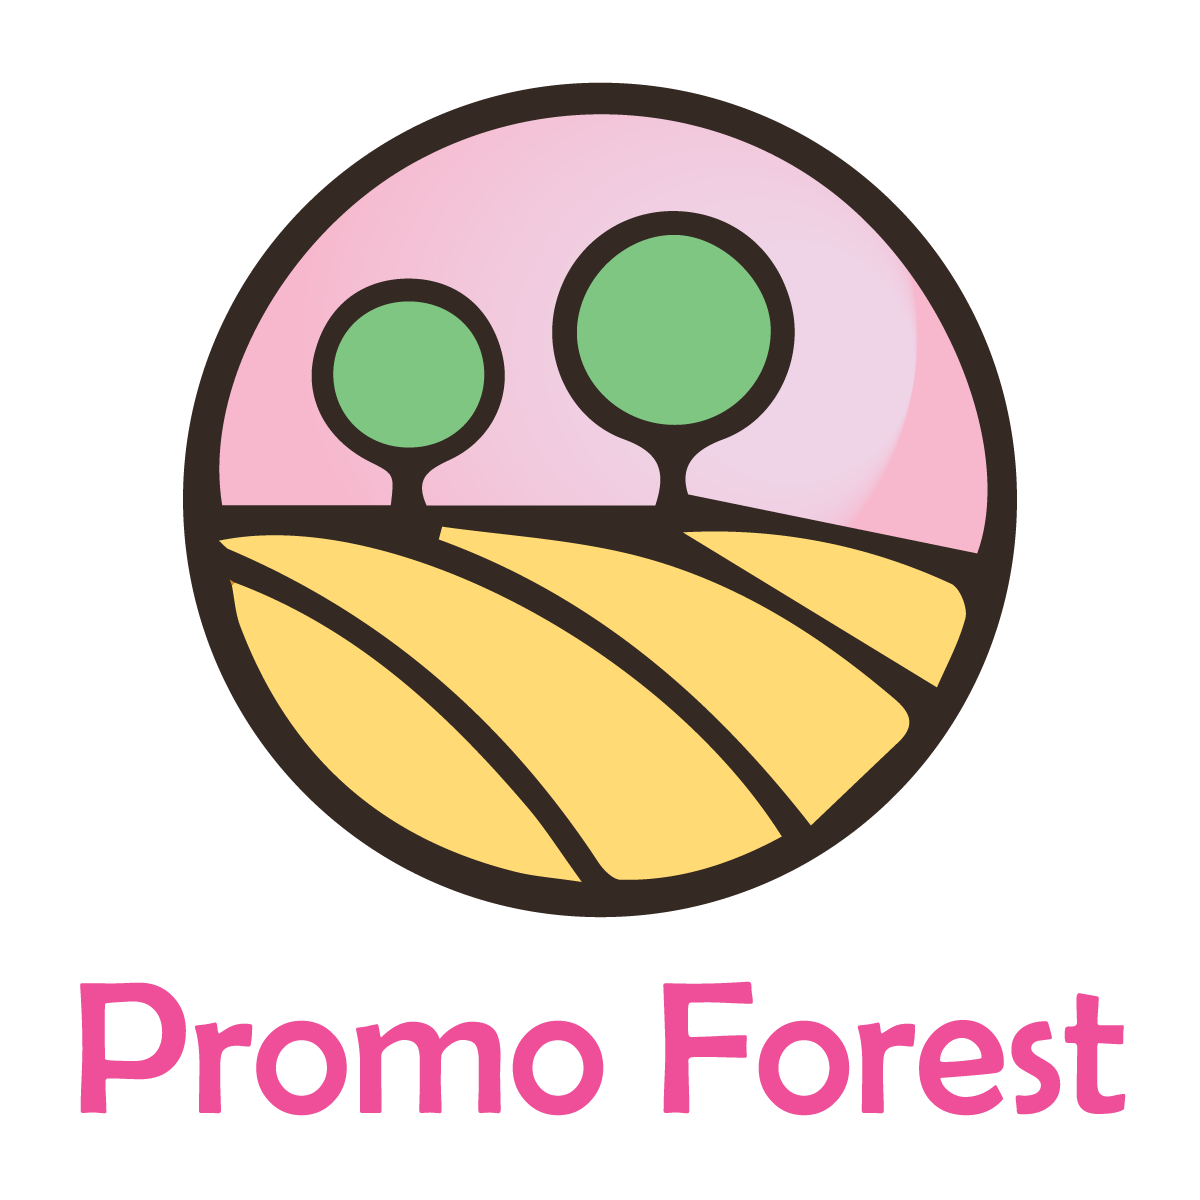 Promo Forest